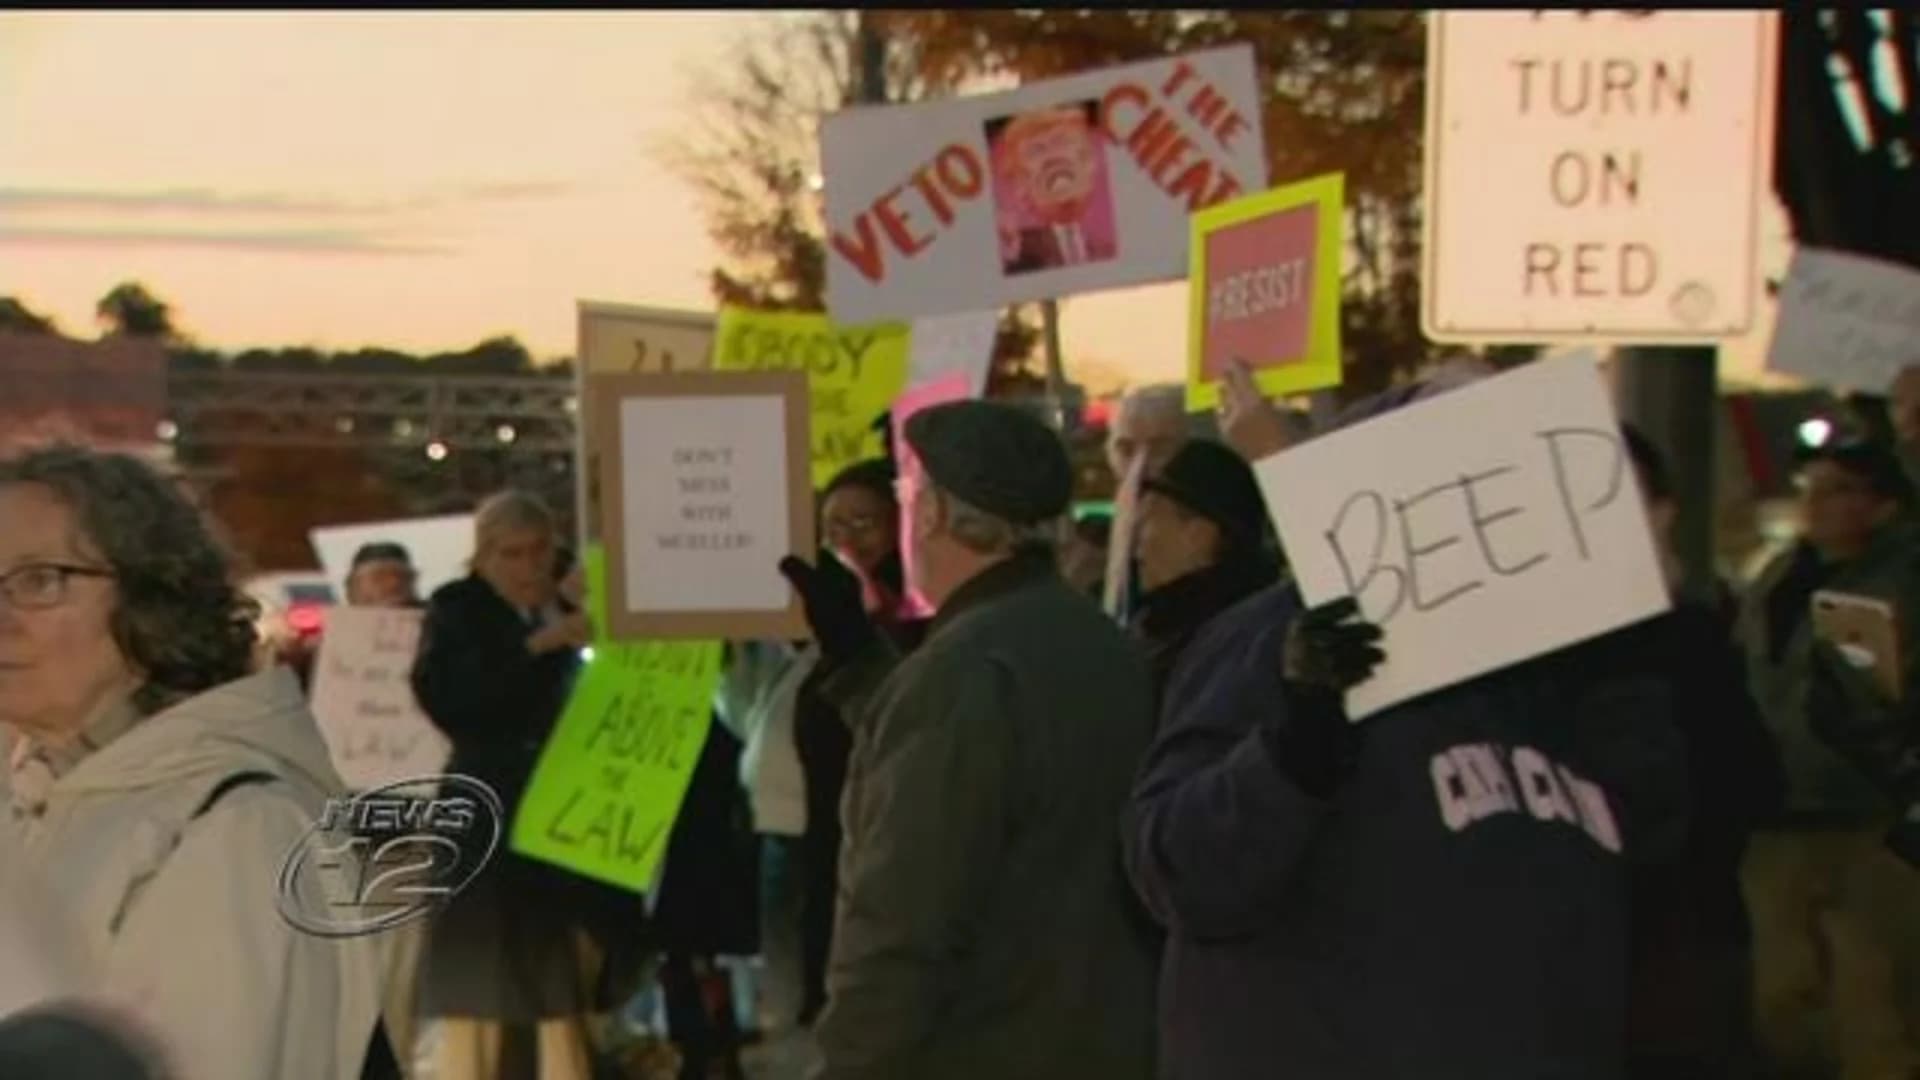 Organizers say they staged Nanuet rally in 1 day to be part of national protests